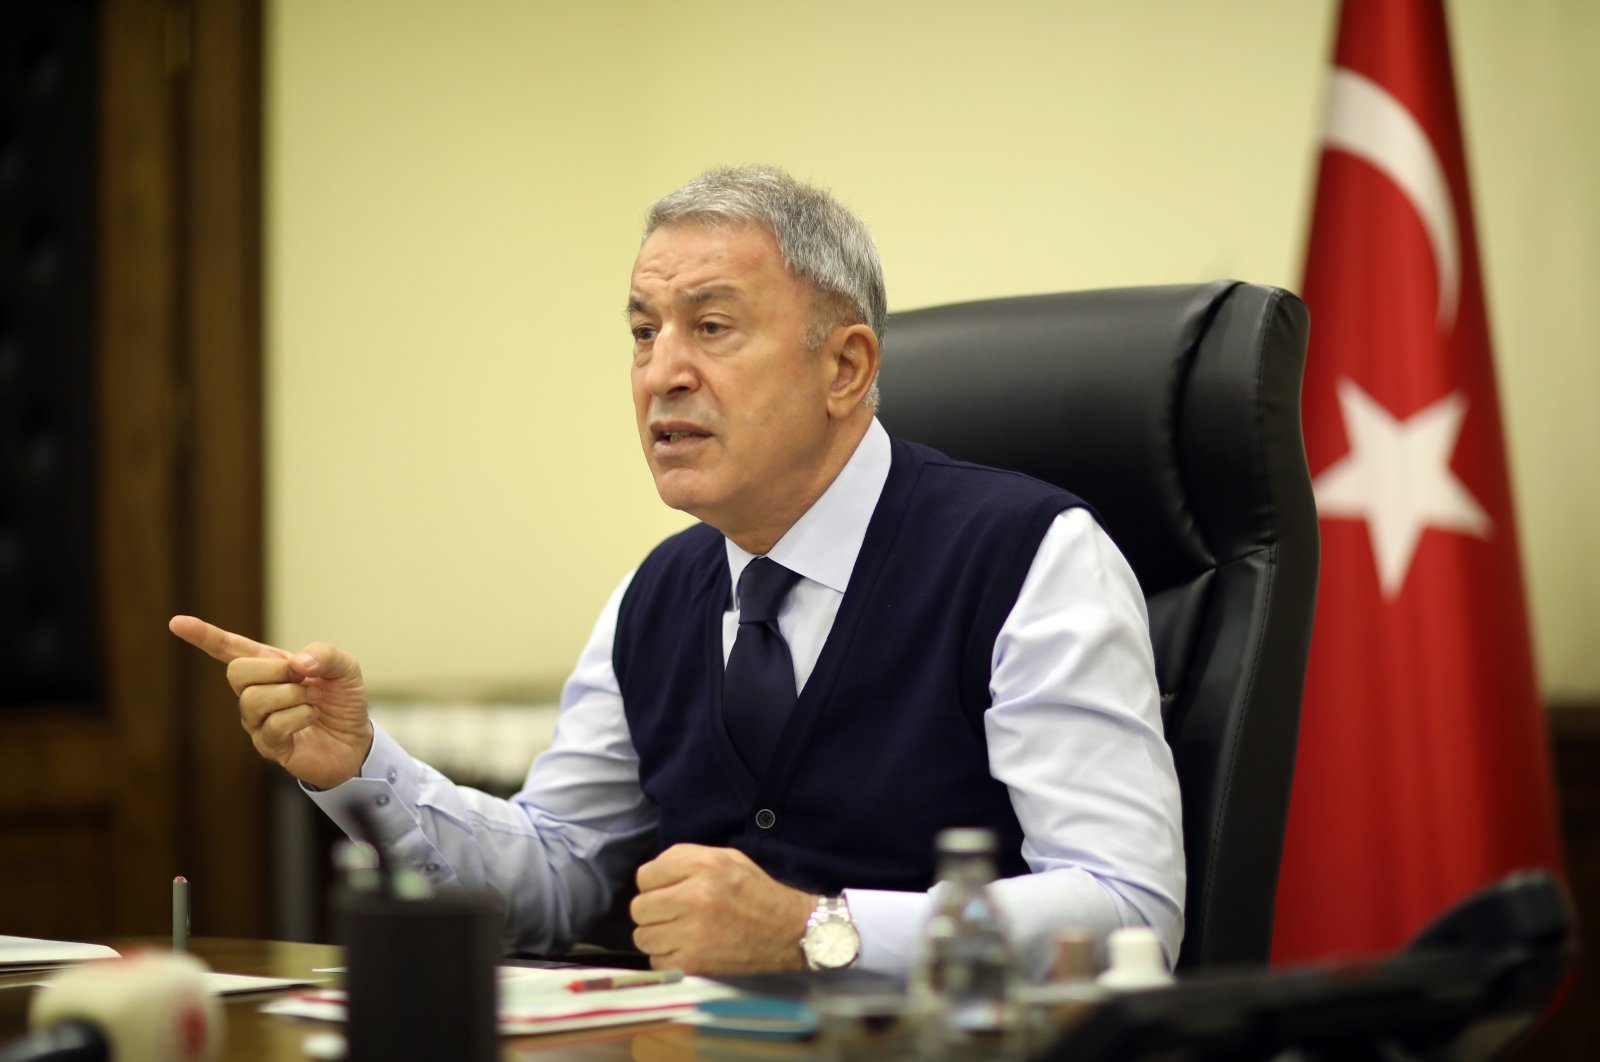 Defense Minister Hulusi Akar speaks in a video conference with military commanders in Ankara, Turkey, Oct. 5, 2020 (AA Photo)